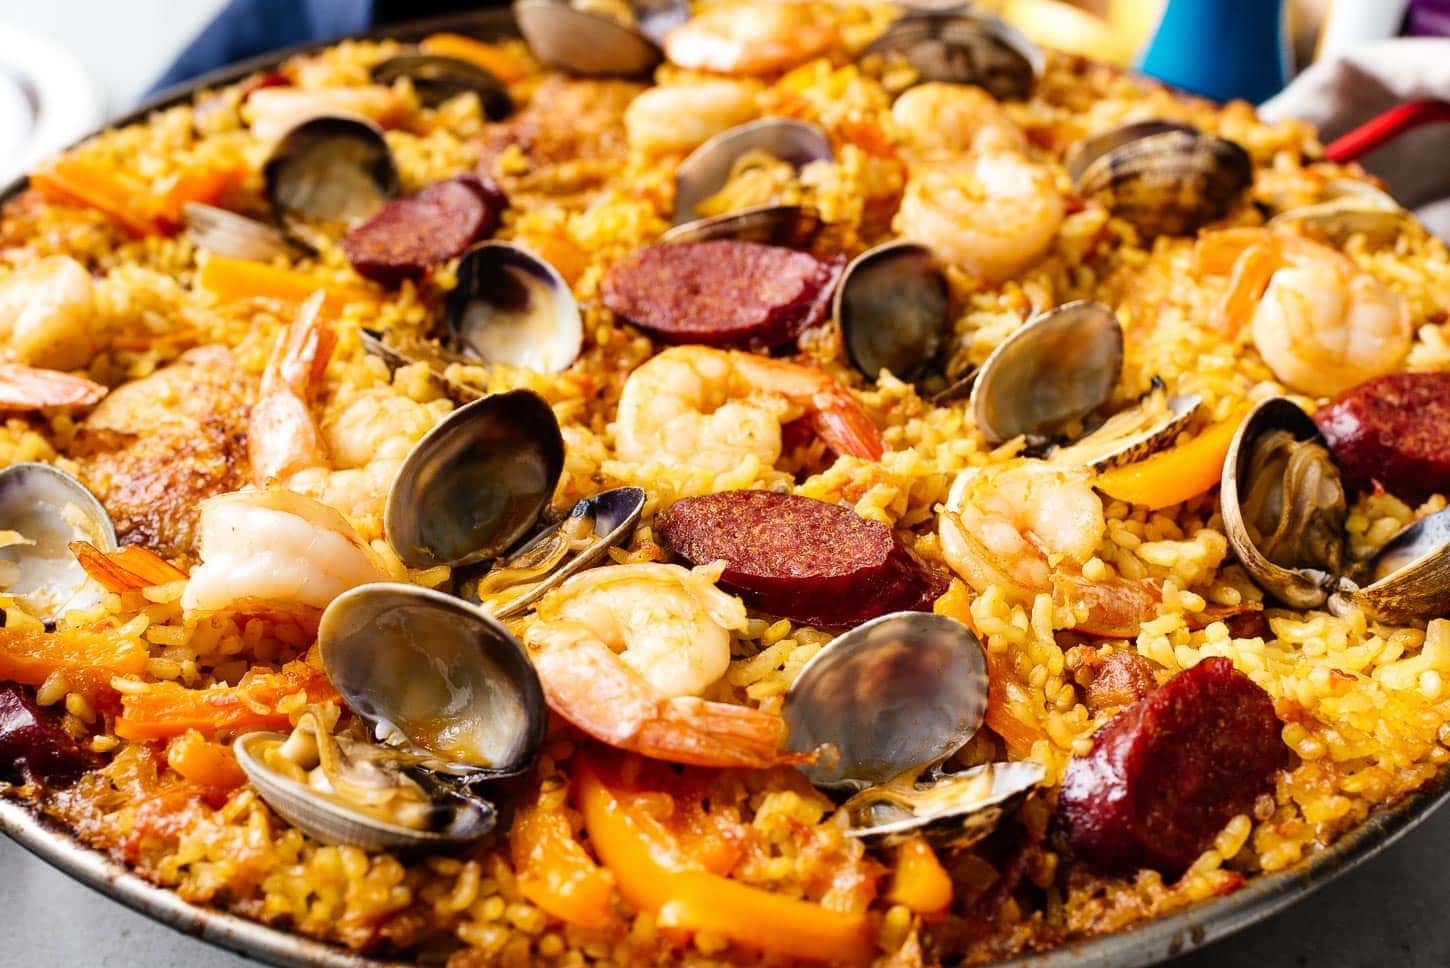 Arborio Rice for Paella: Is It OK to Use?